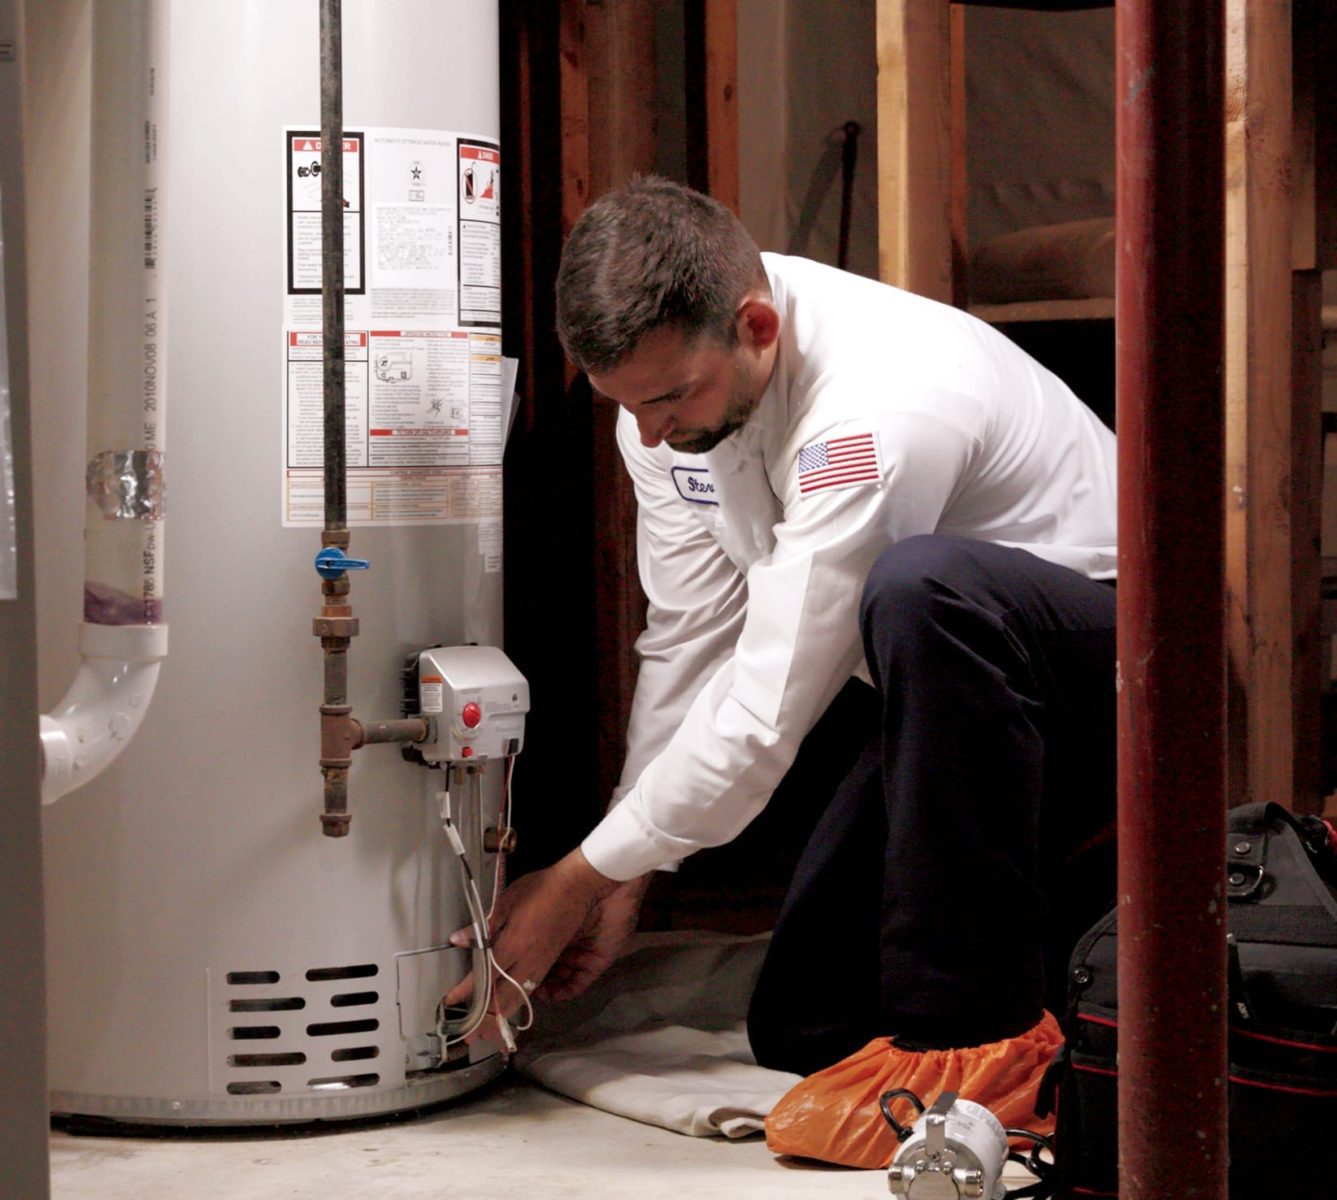 Do's and Don'ts of Hot Water Heater Safety